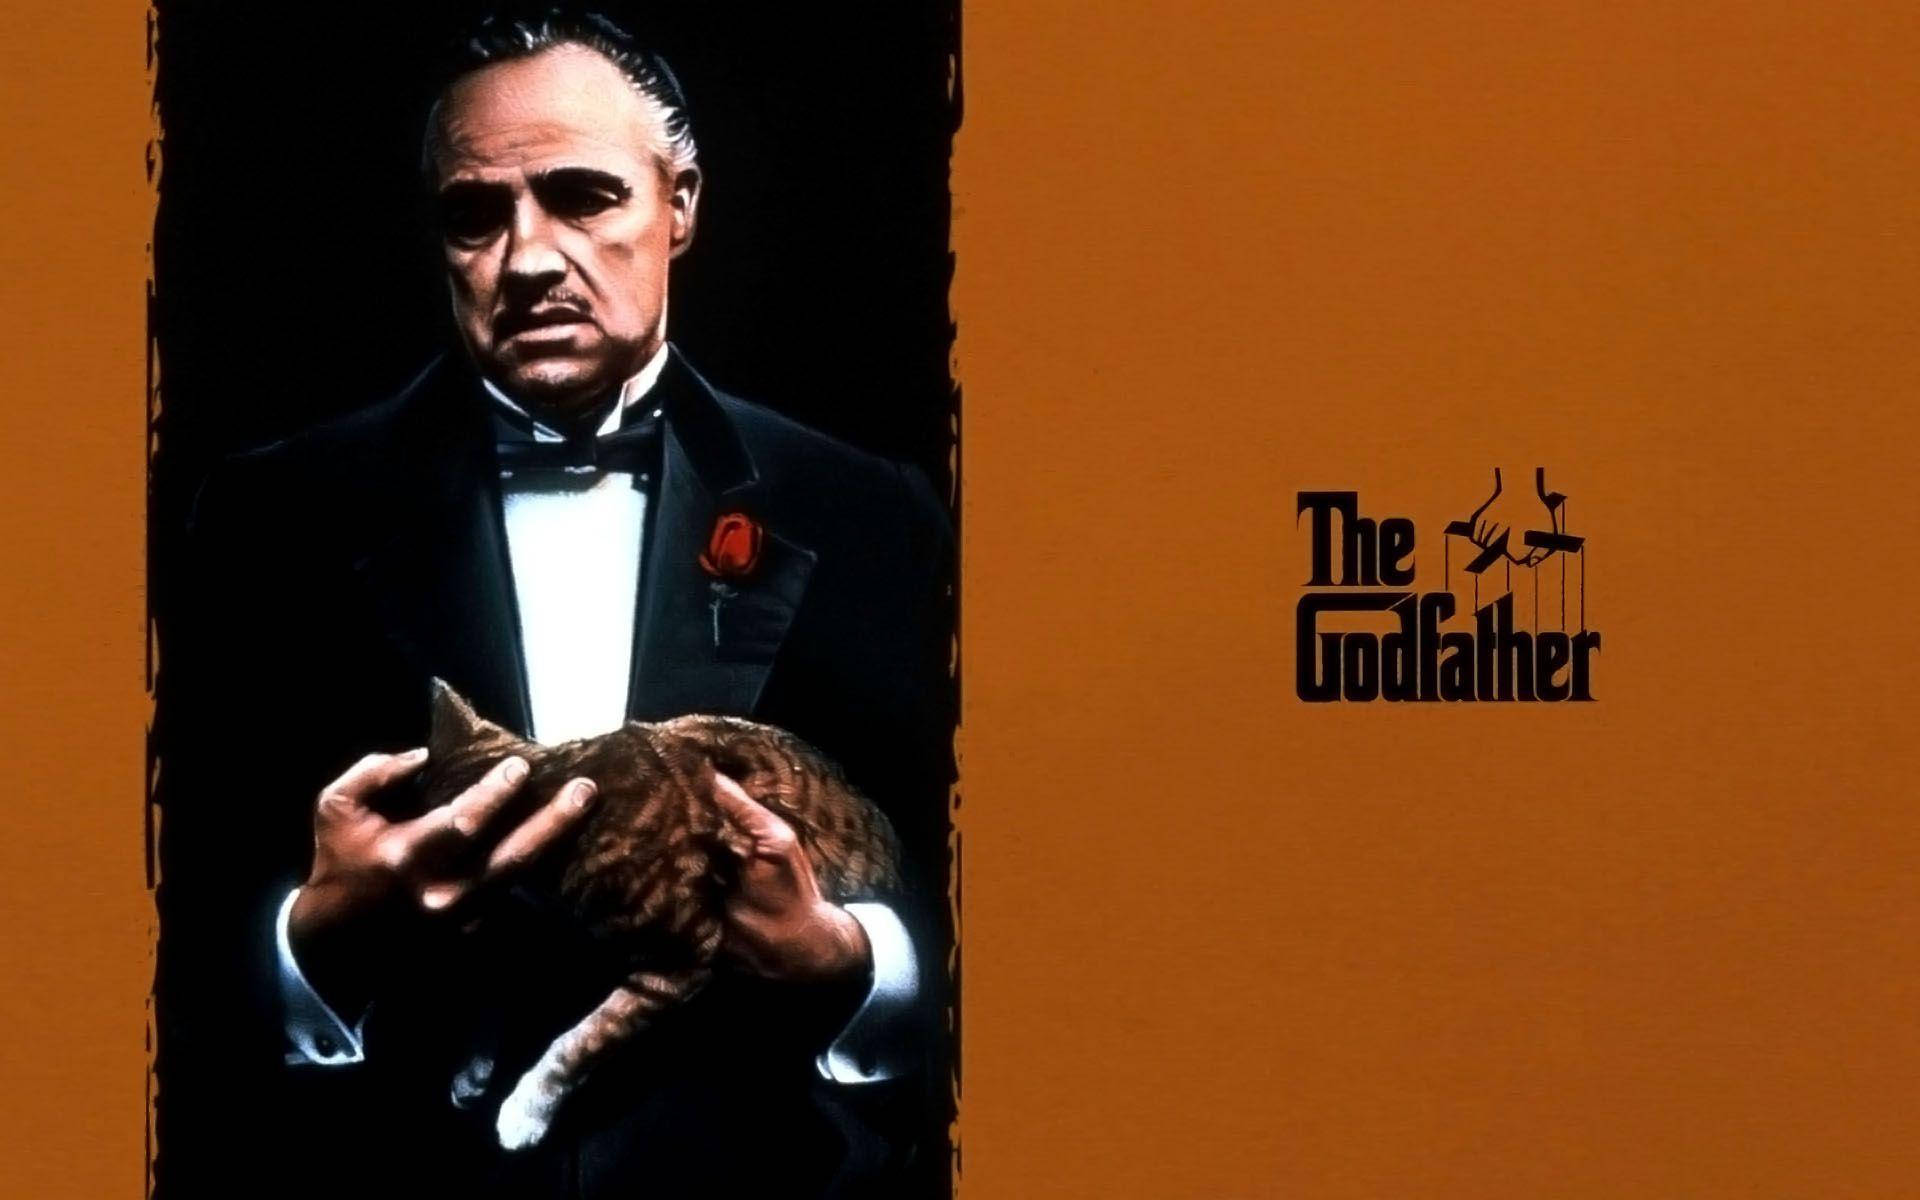 The Godfather: Five Families phone wallpaper» 1080P, 2k, 4k Full HD  Wallpapers, Backgrounds Free Download | Wallpaper Crafter